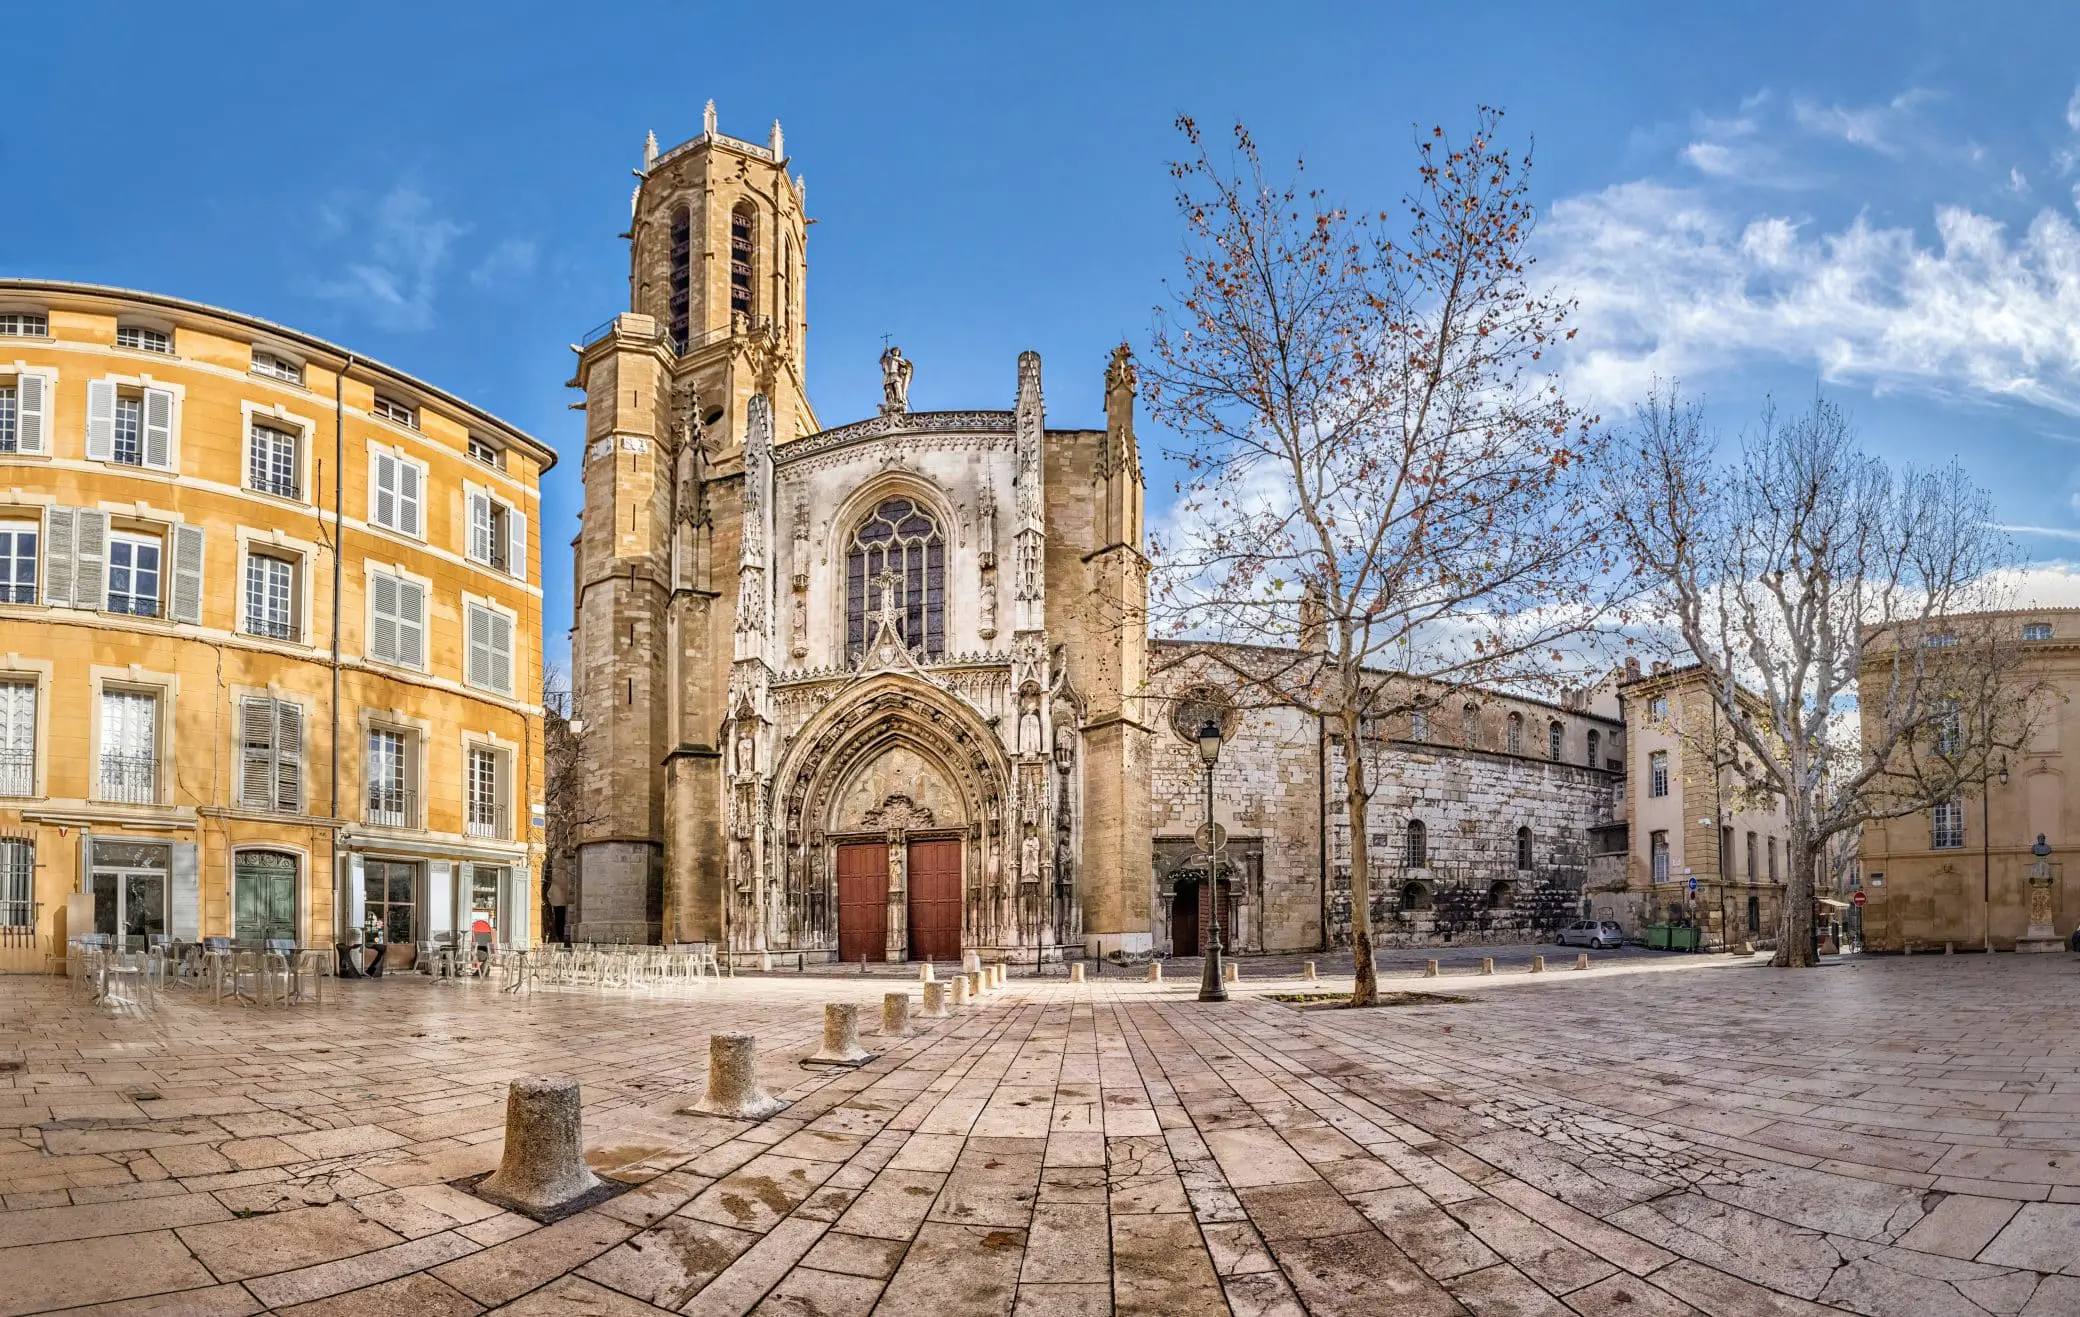 The Aix Cathedral In Aix En Provence, France